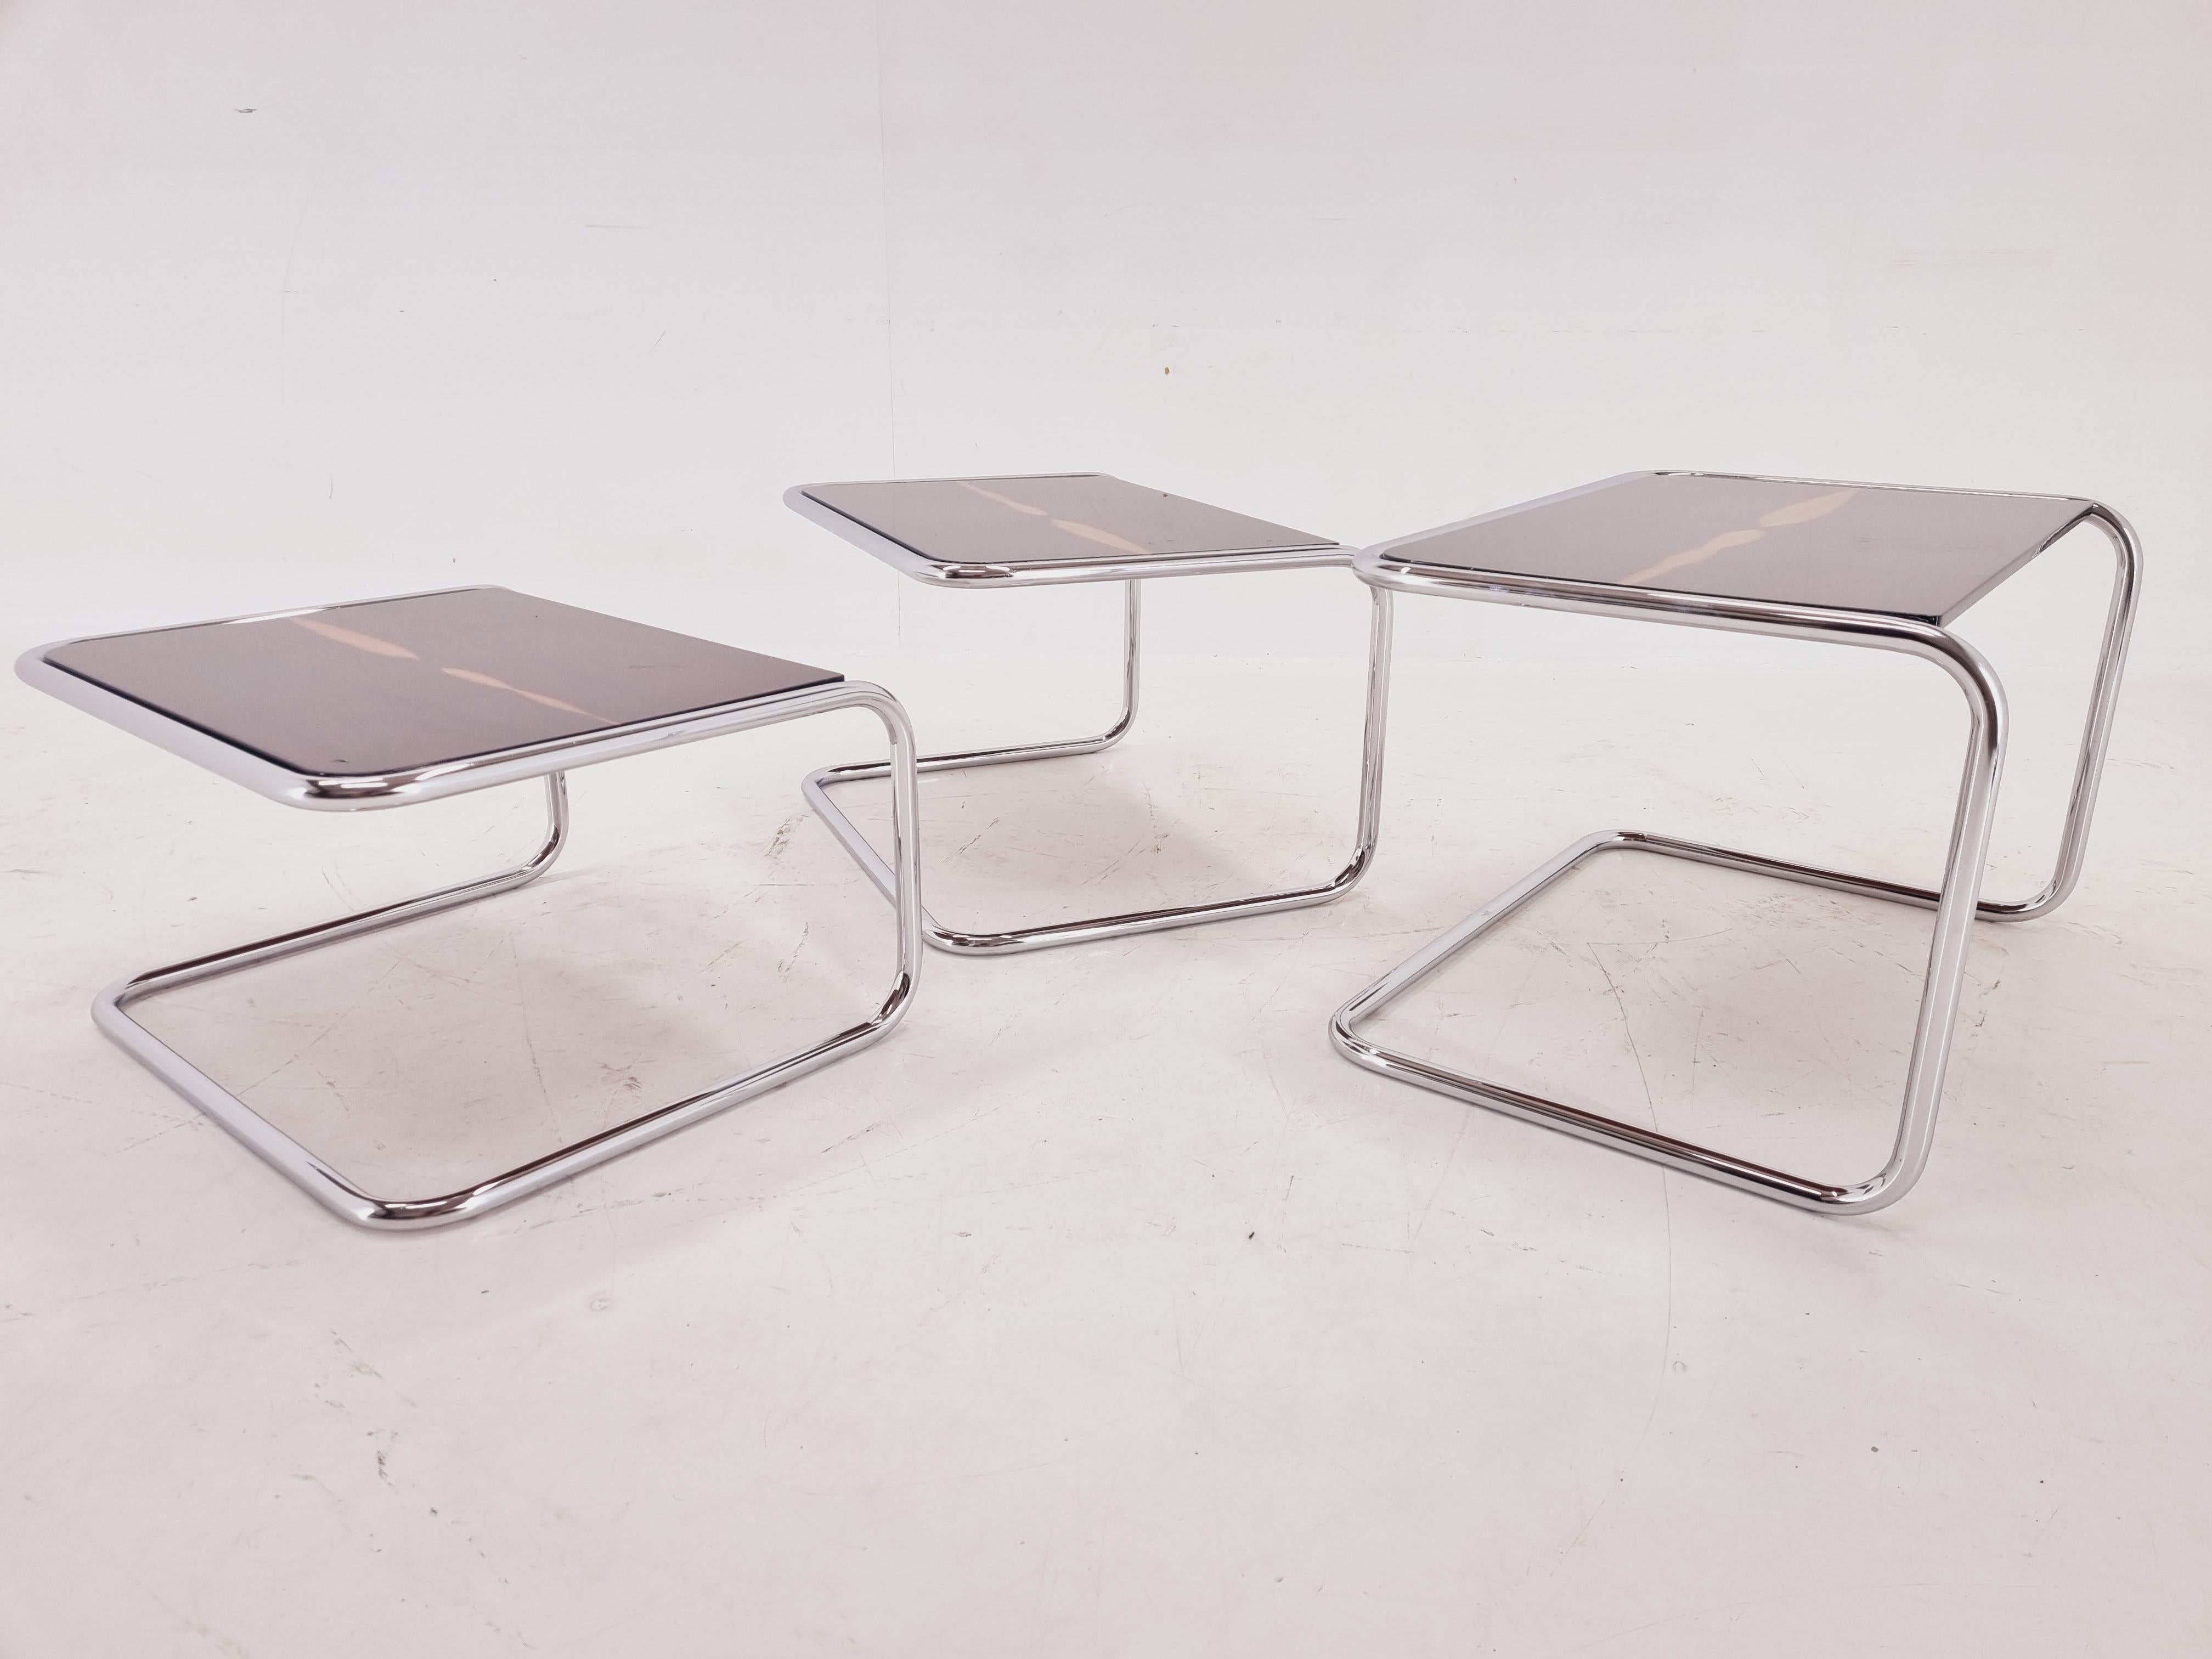 Exclusive Rare Midcentury Nesting Tables, Cocobolo Palisandr and Chrome, 1950s. For Sale 6